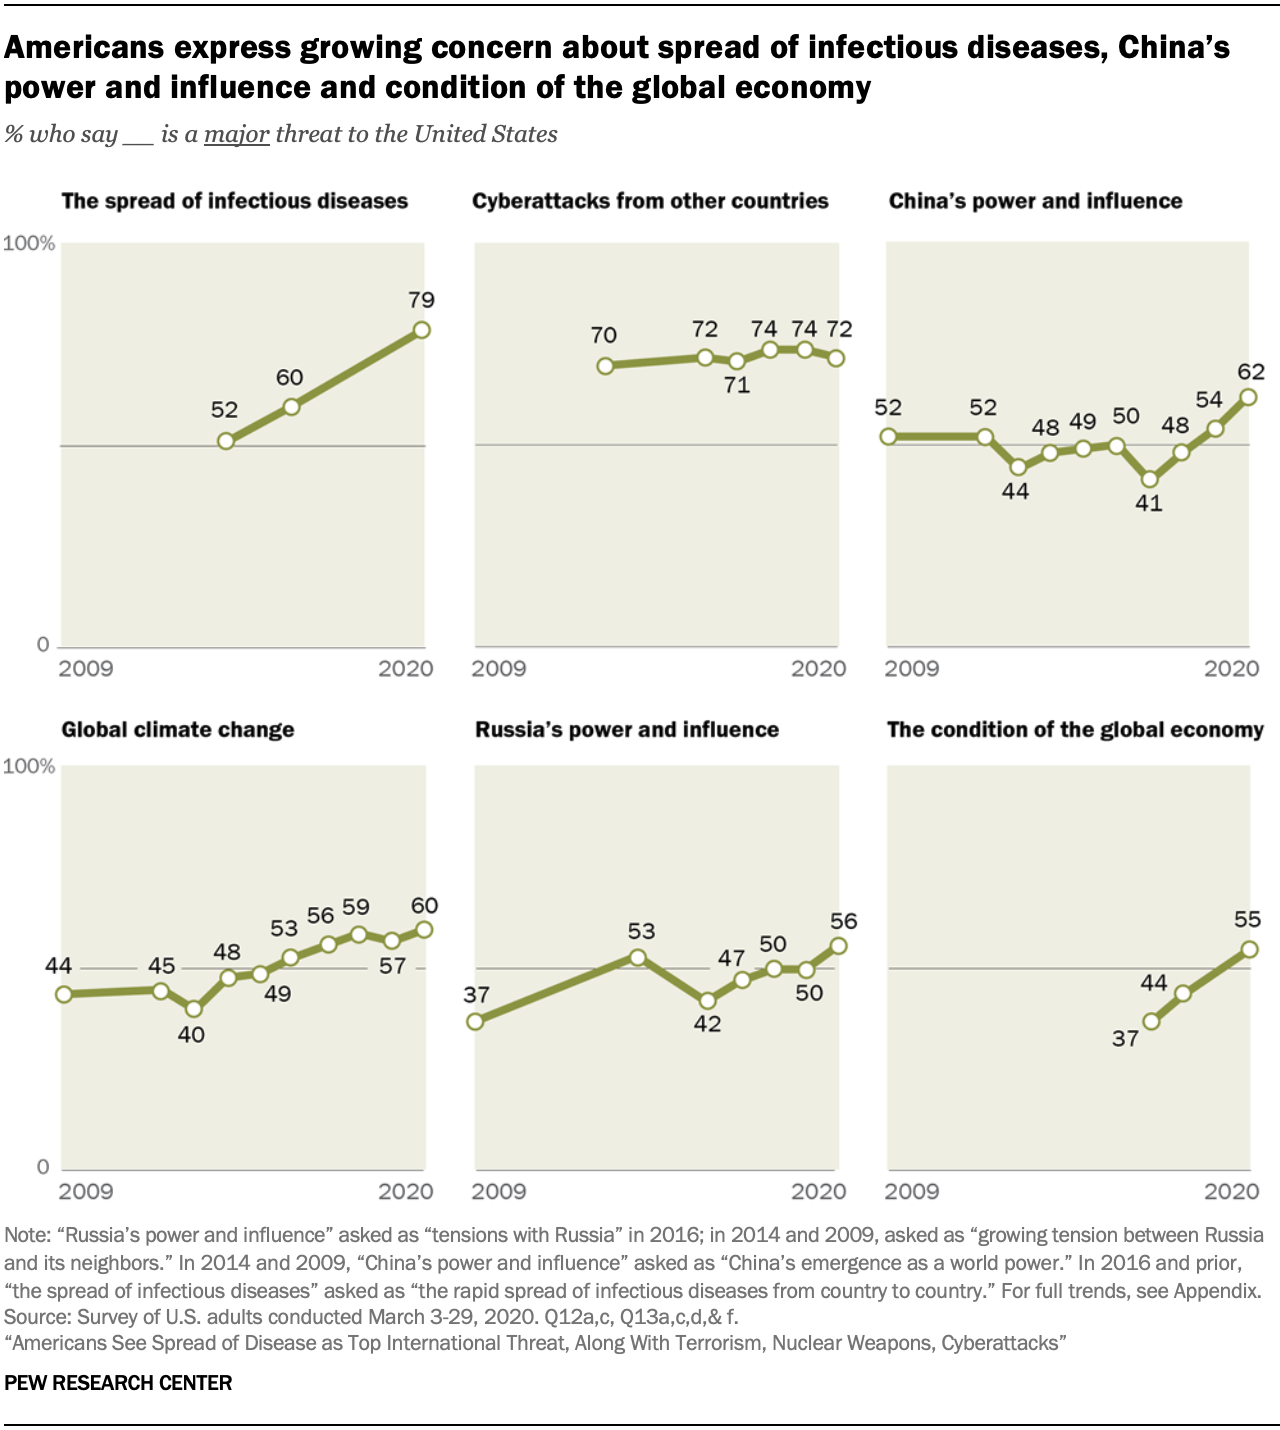 A chart showing Americans express growing concern about spread of infectious diseases, China’s power and influence and condition of the global economy